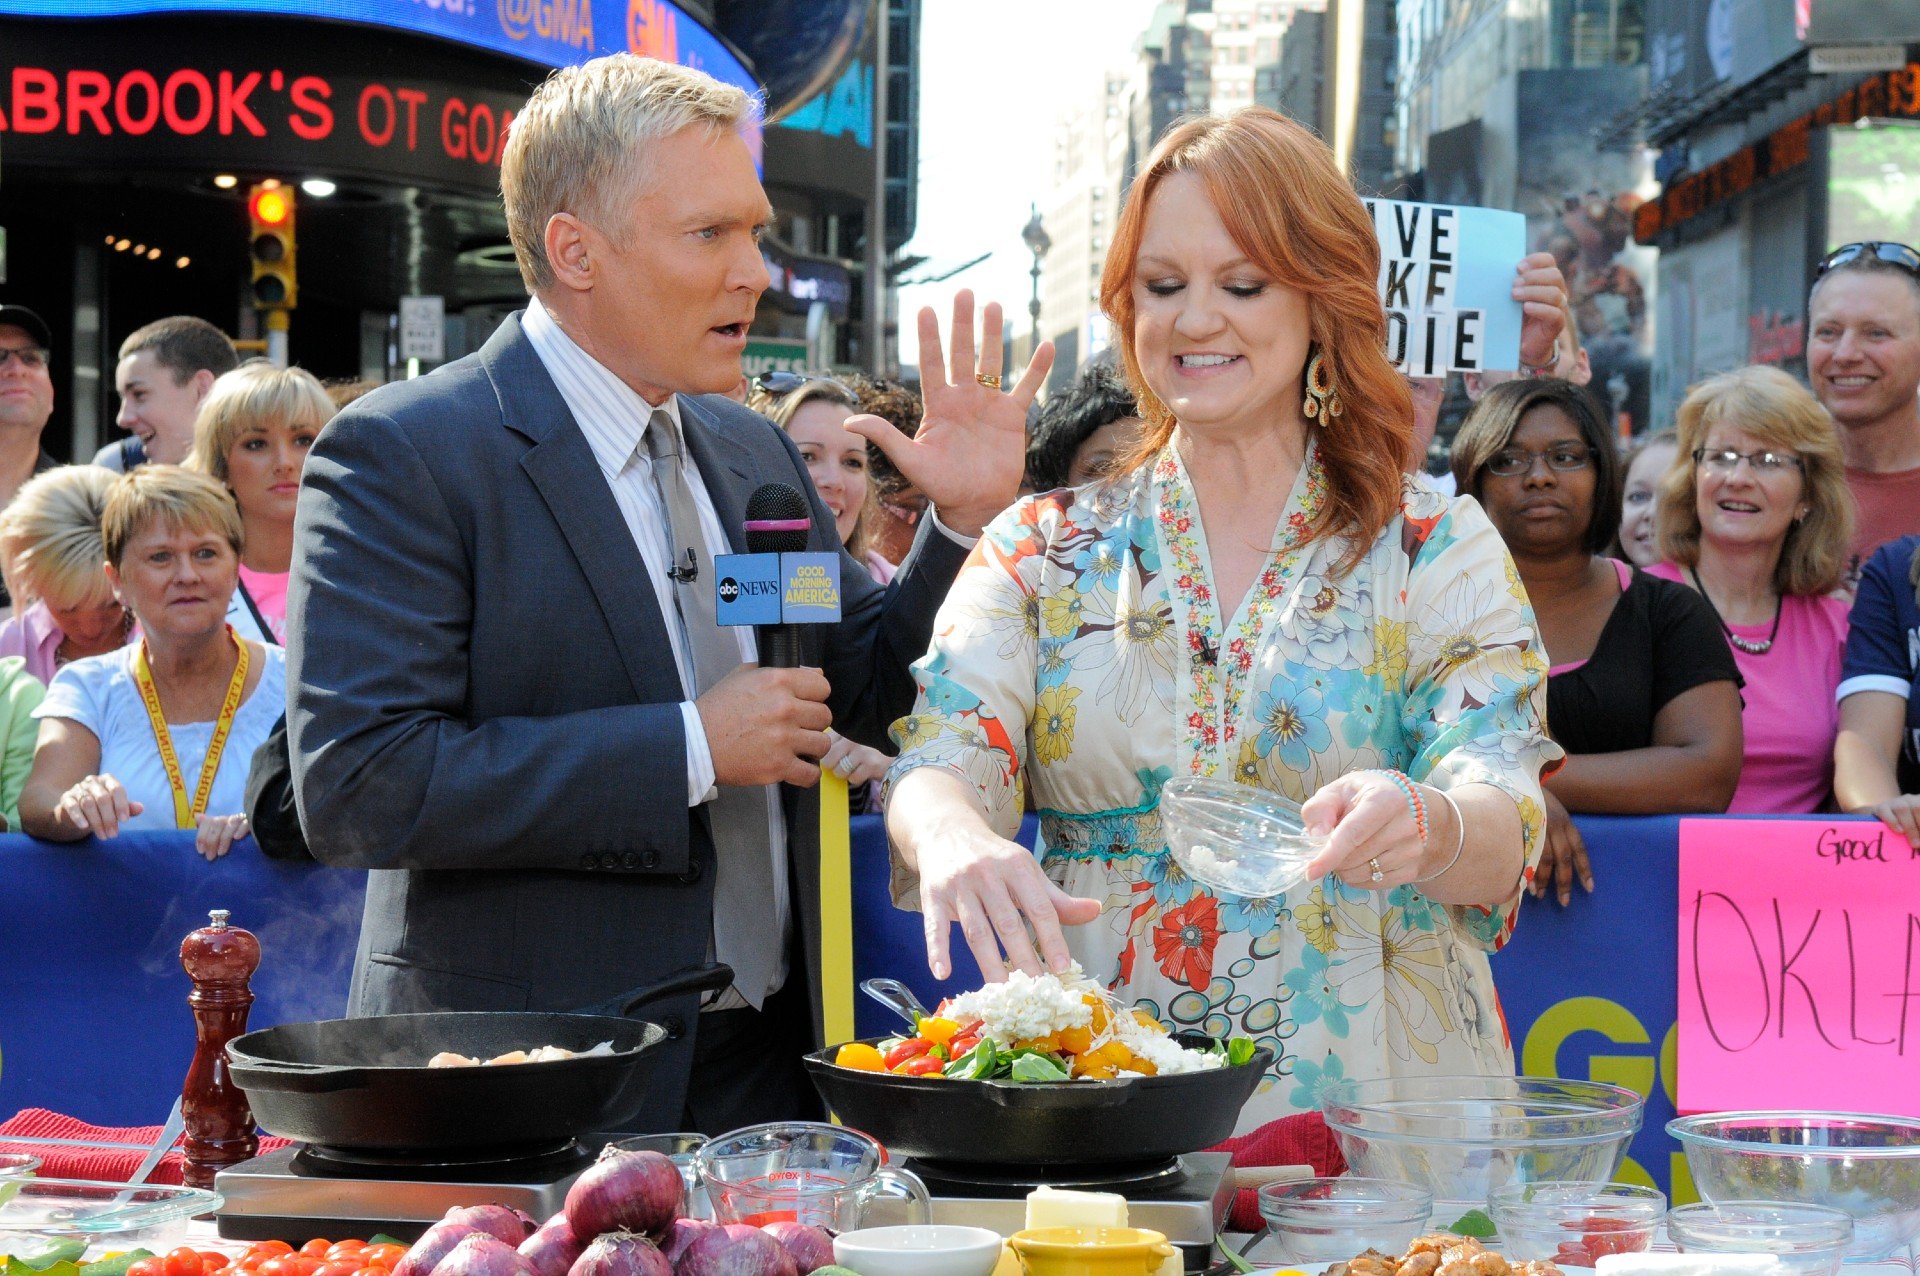 Sam Champion and Ree Drummond appear on Good Morning America during a cooking demonstration.